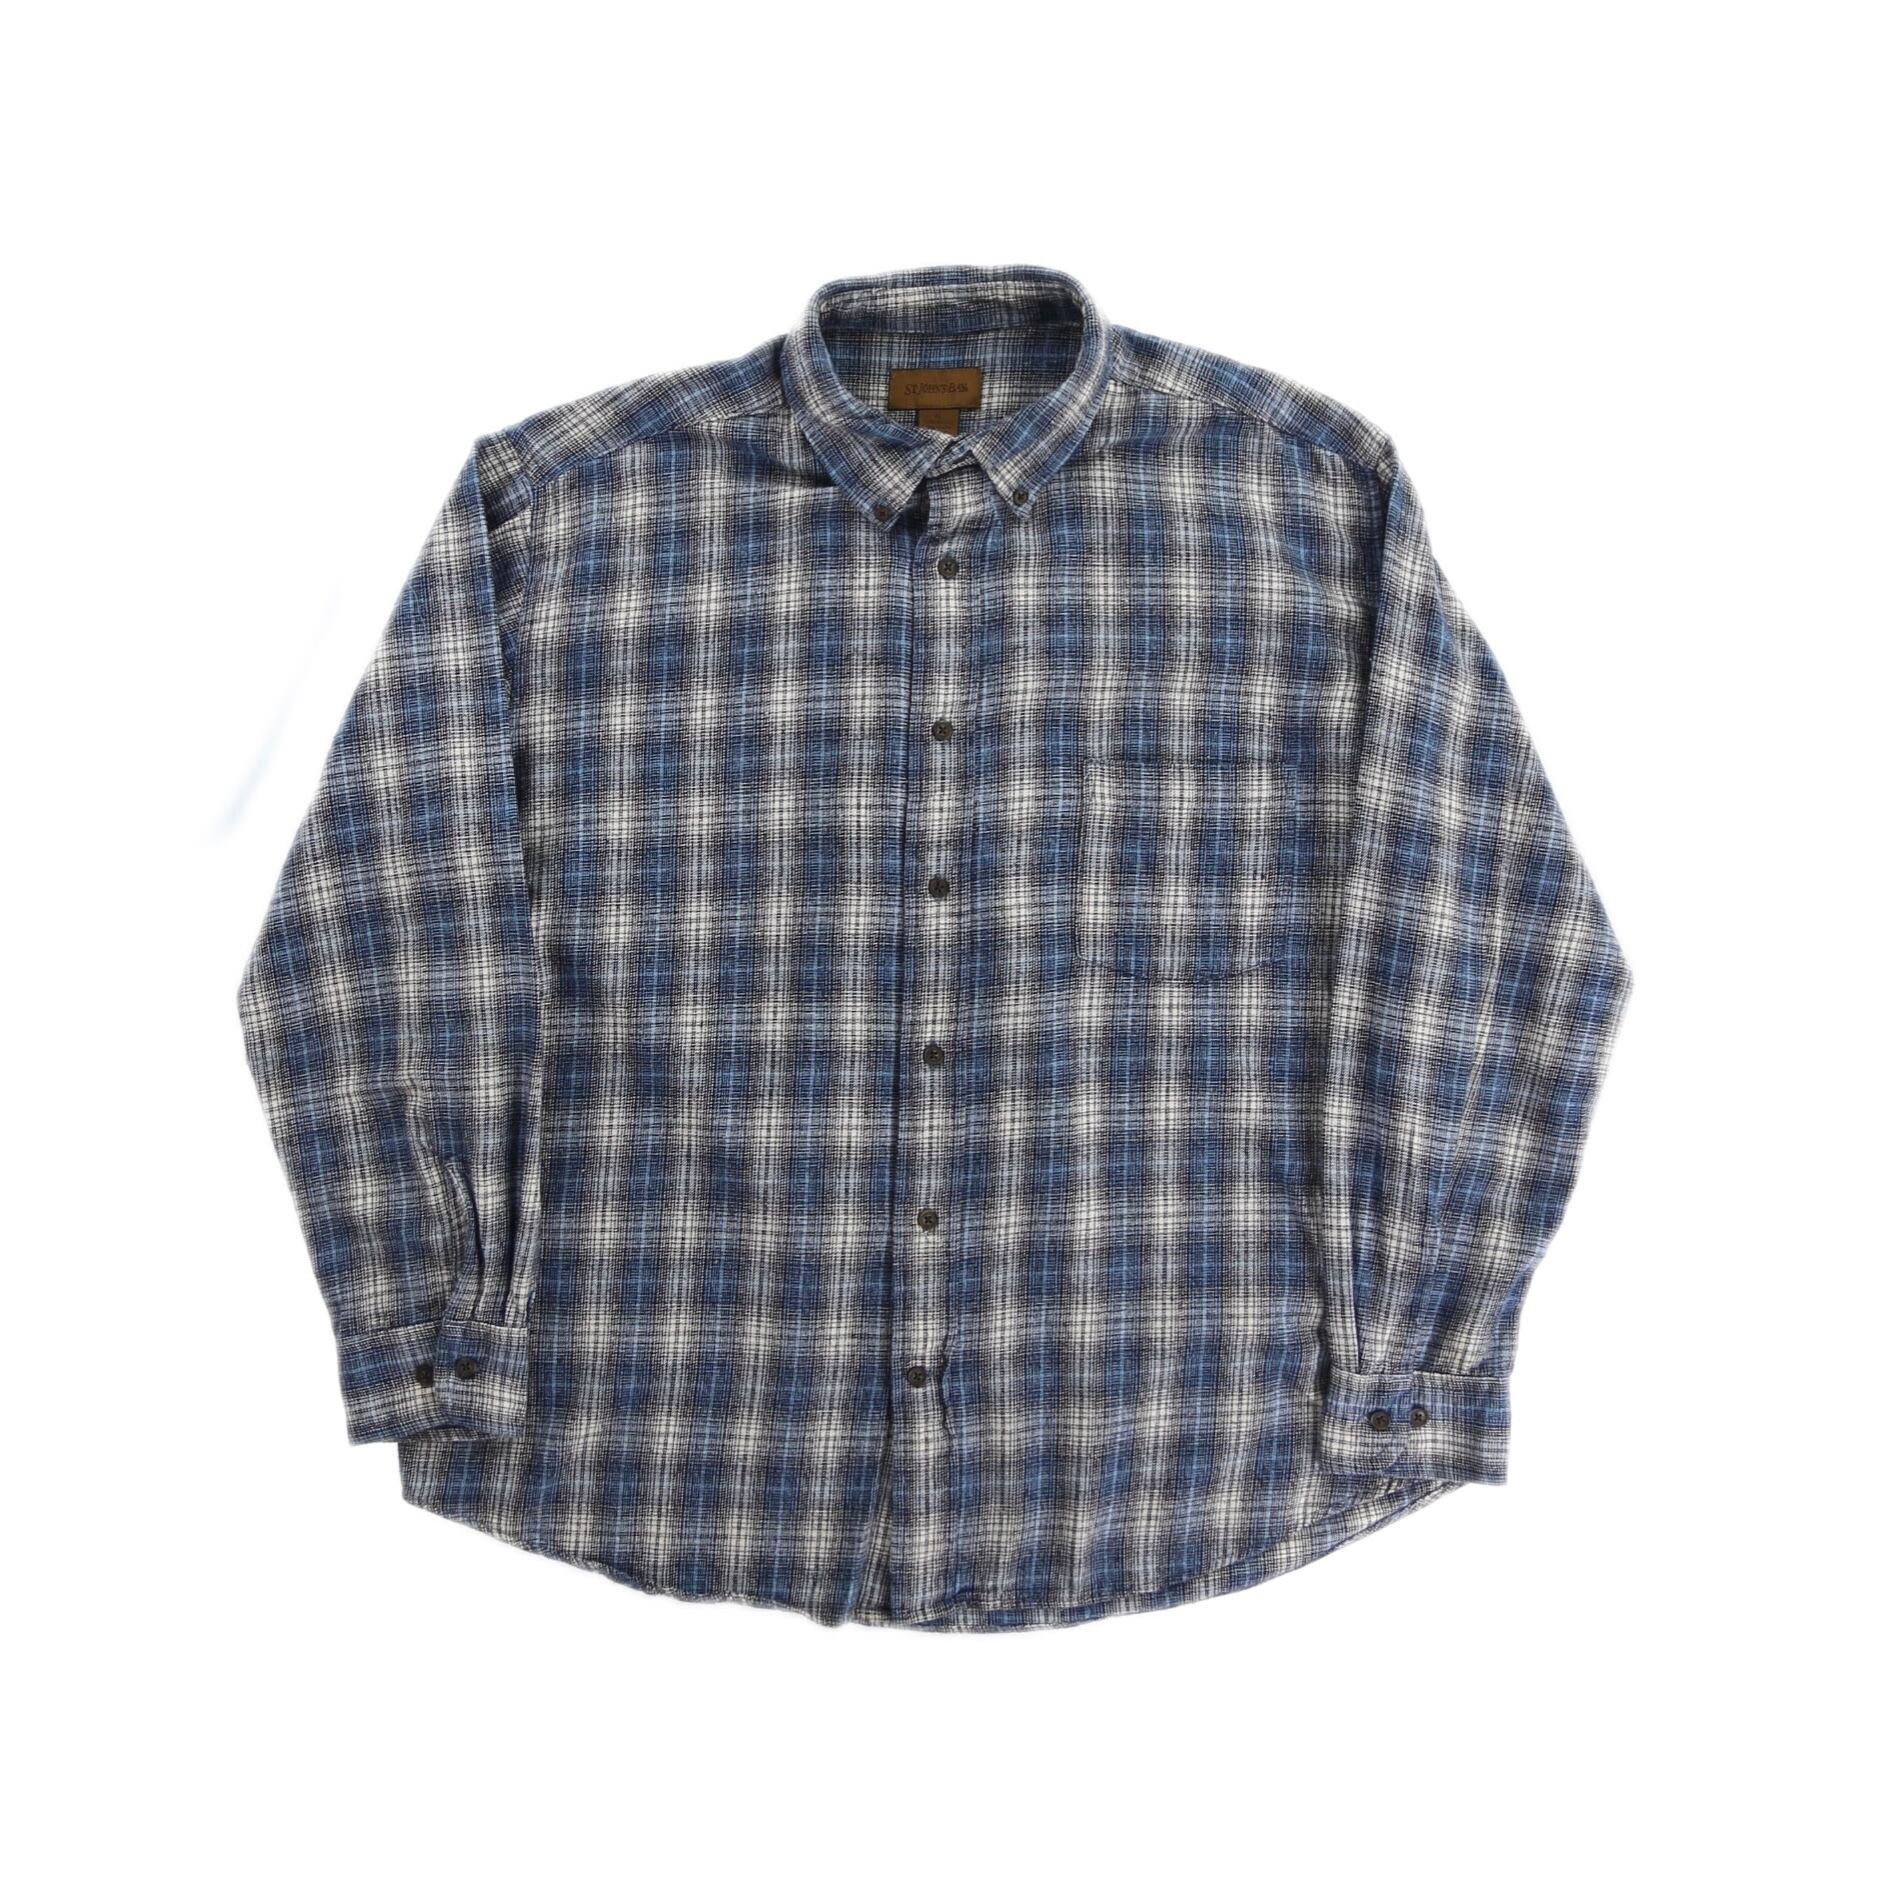 90s vintage ombre check flannel shirt